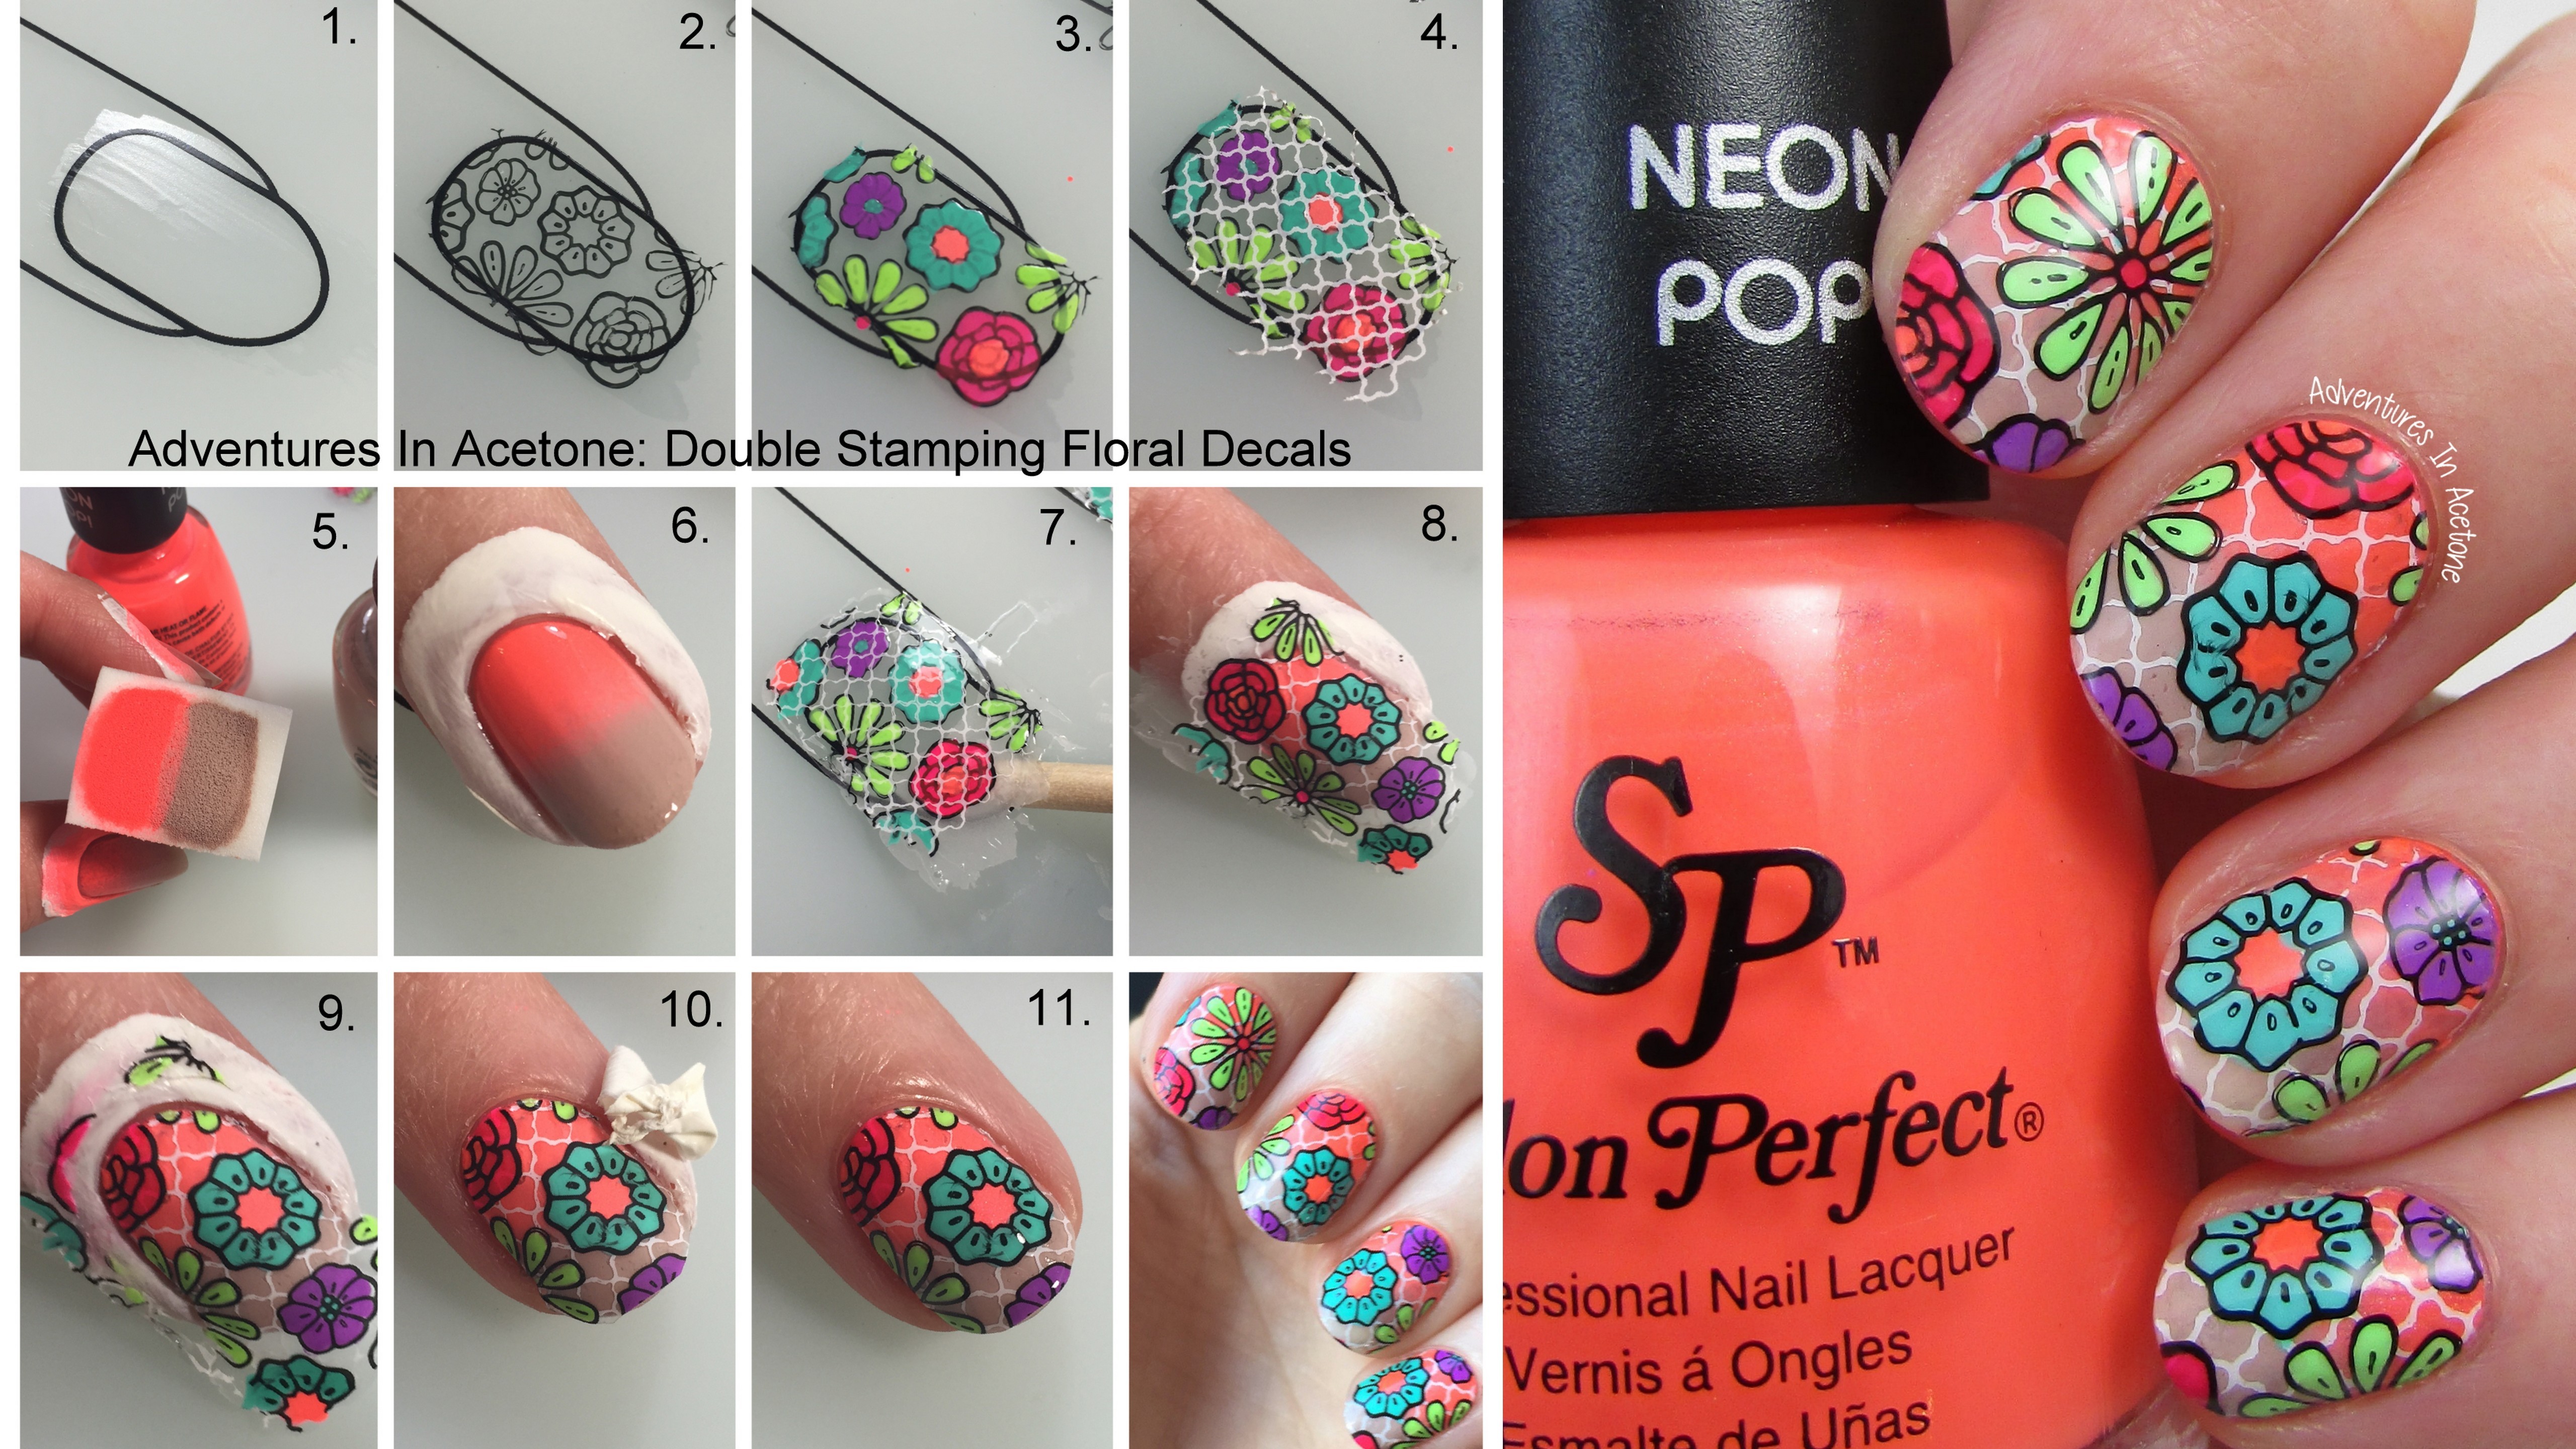 How To Reverse Stamp Using A Silicone Mat Nail Art Tutorial